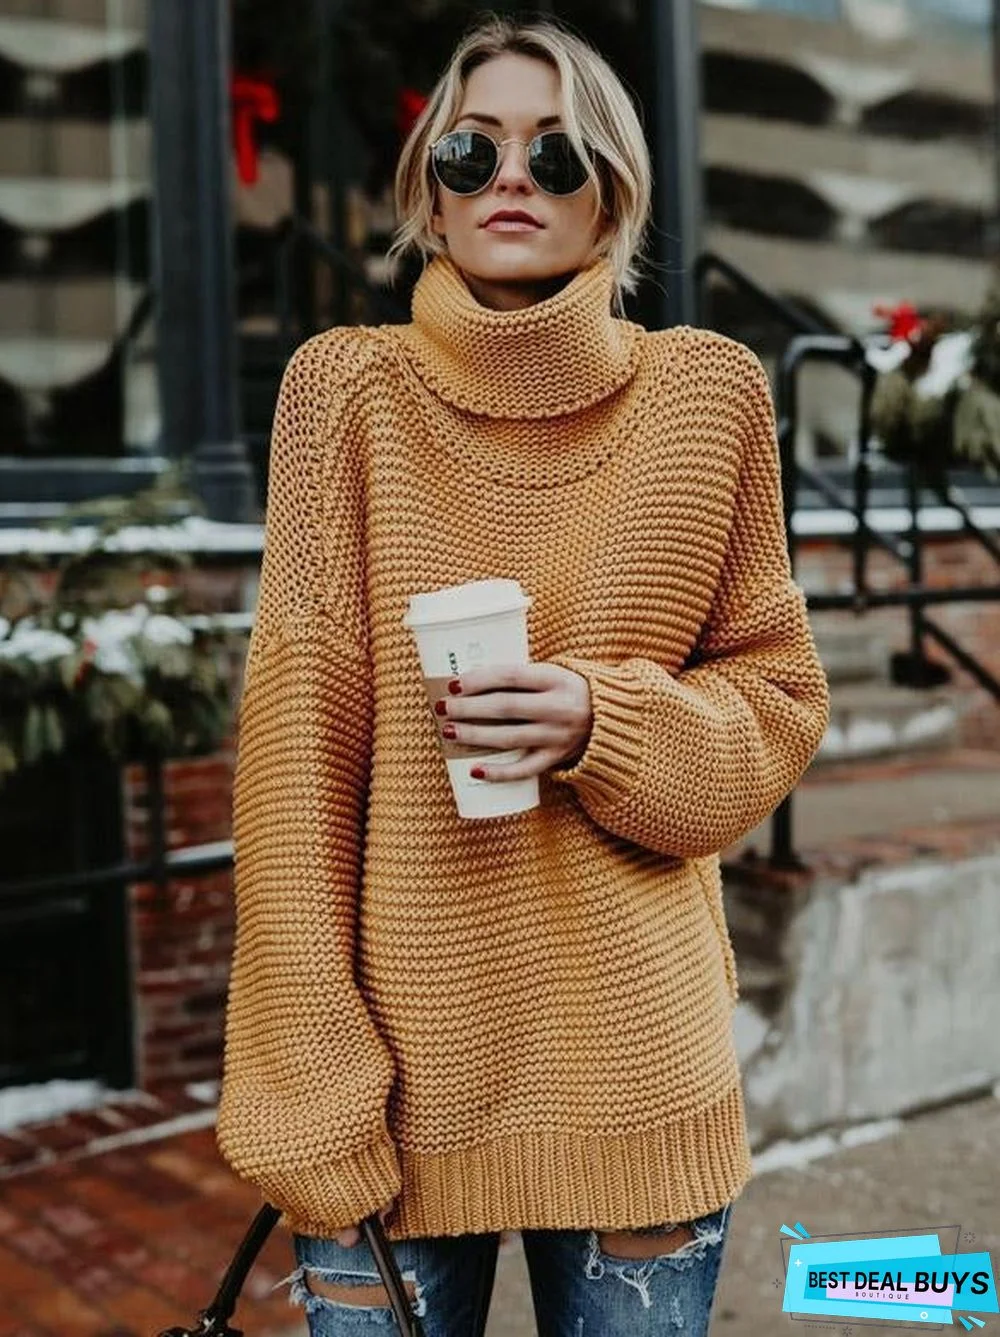 High-Neck Long Sleeves Knitting Sweater Tops